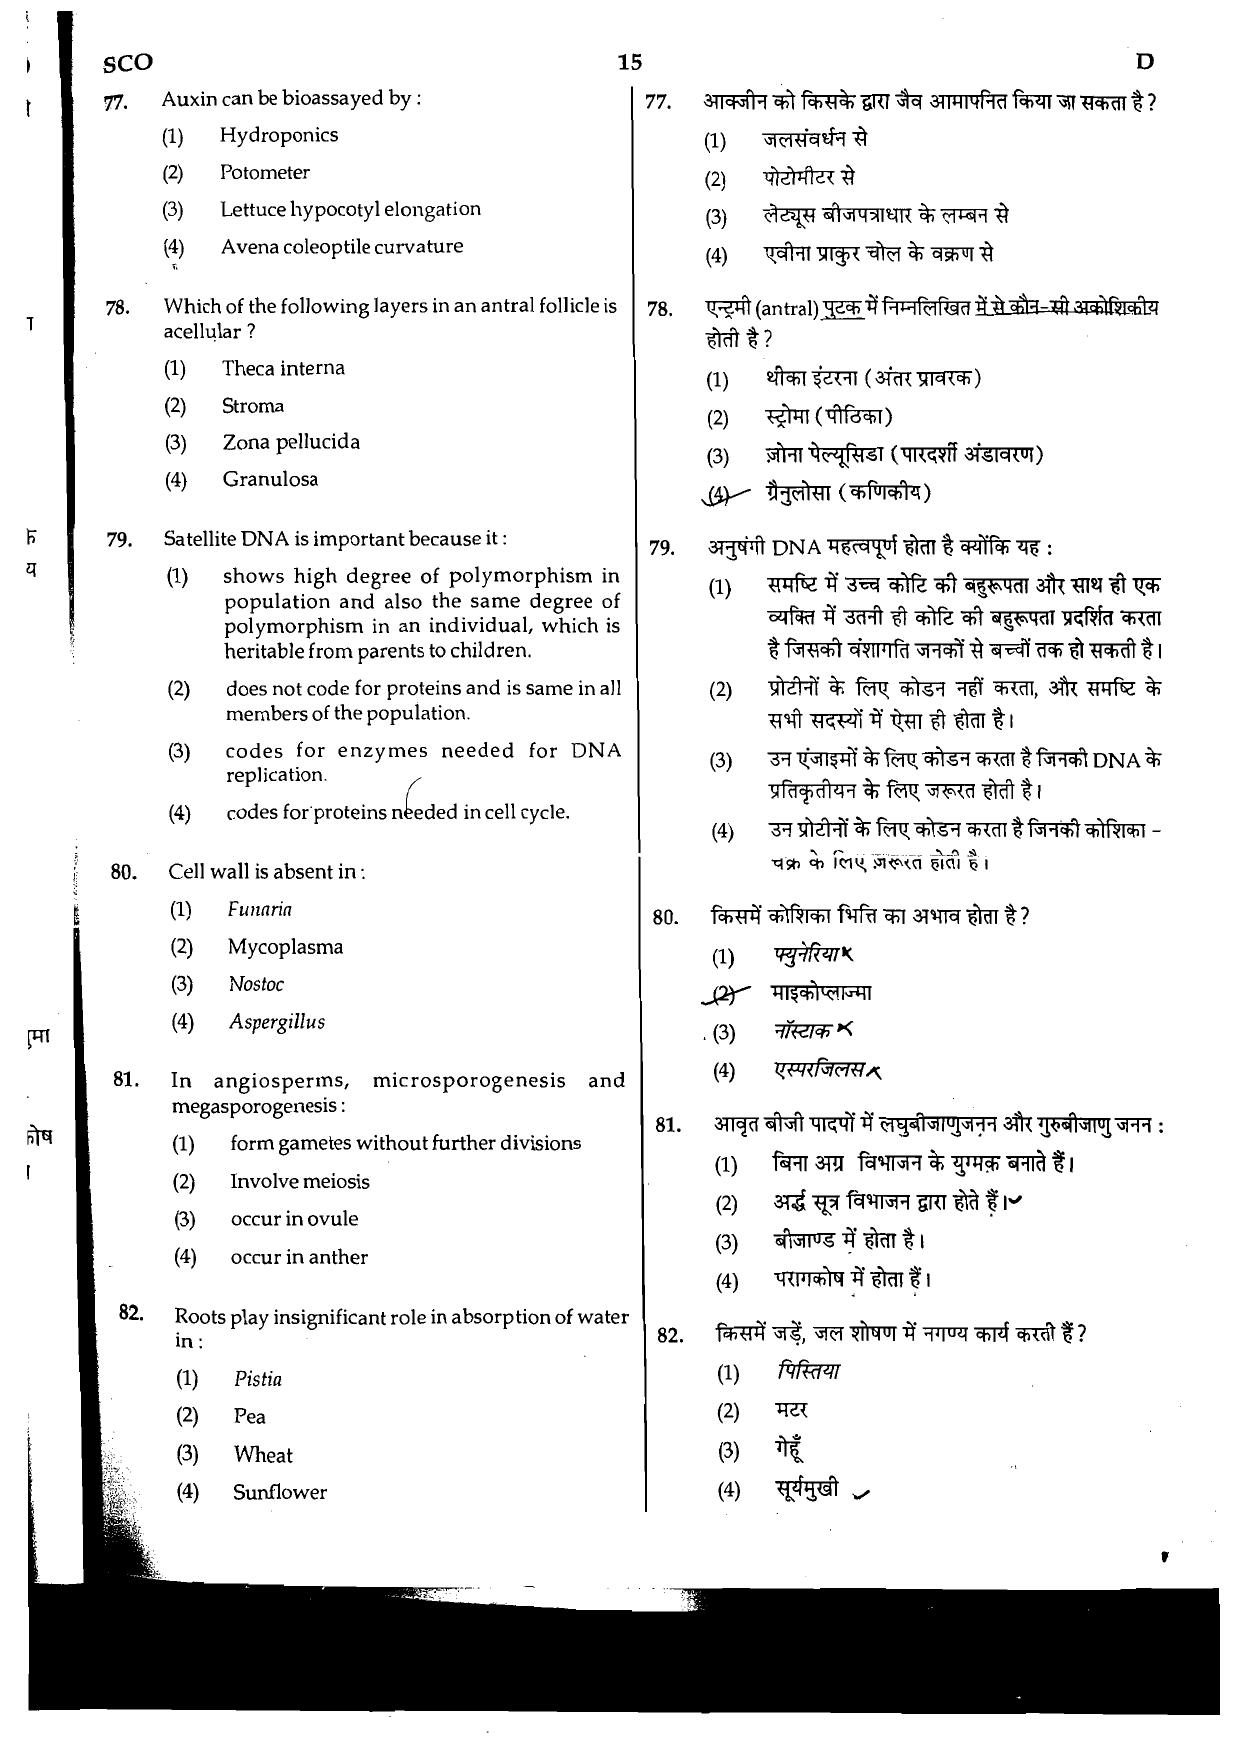 NEET Code D 2015 Question Paper - Page 15